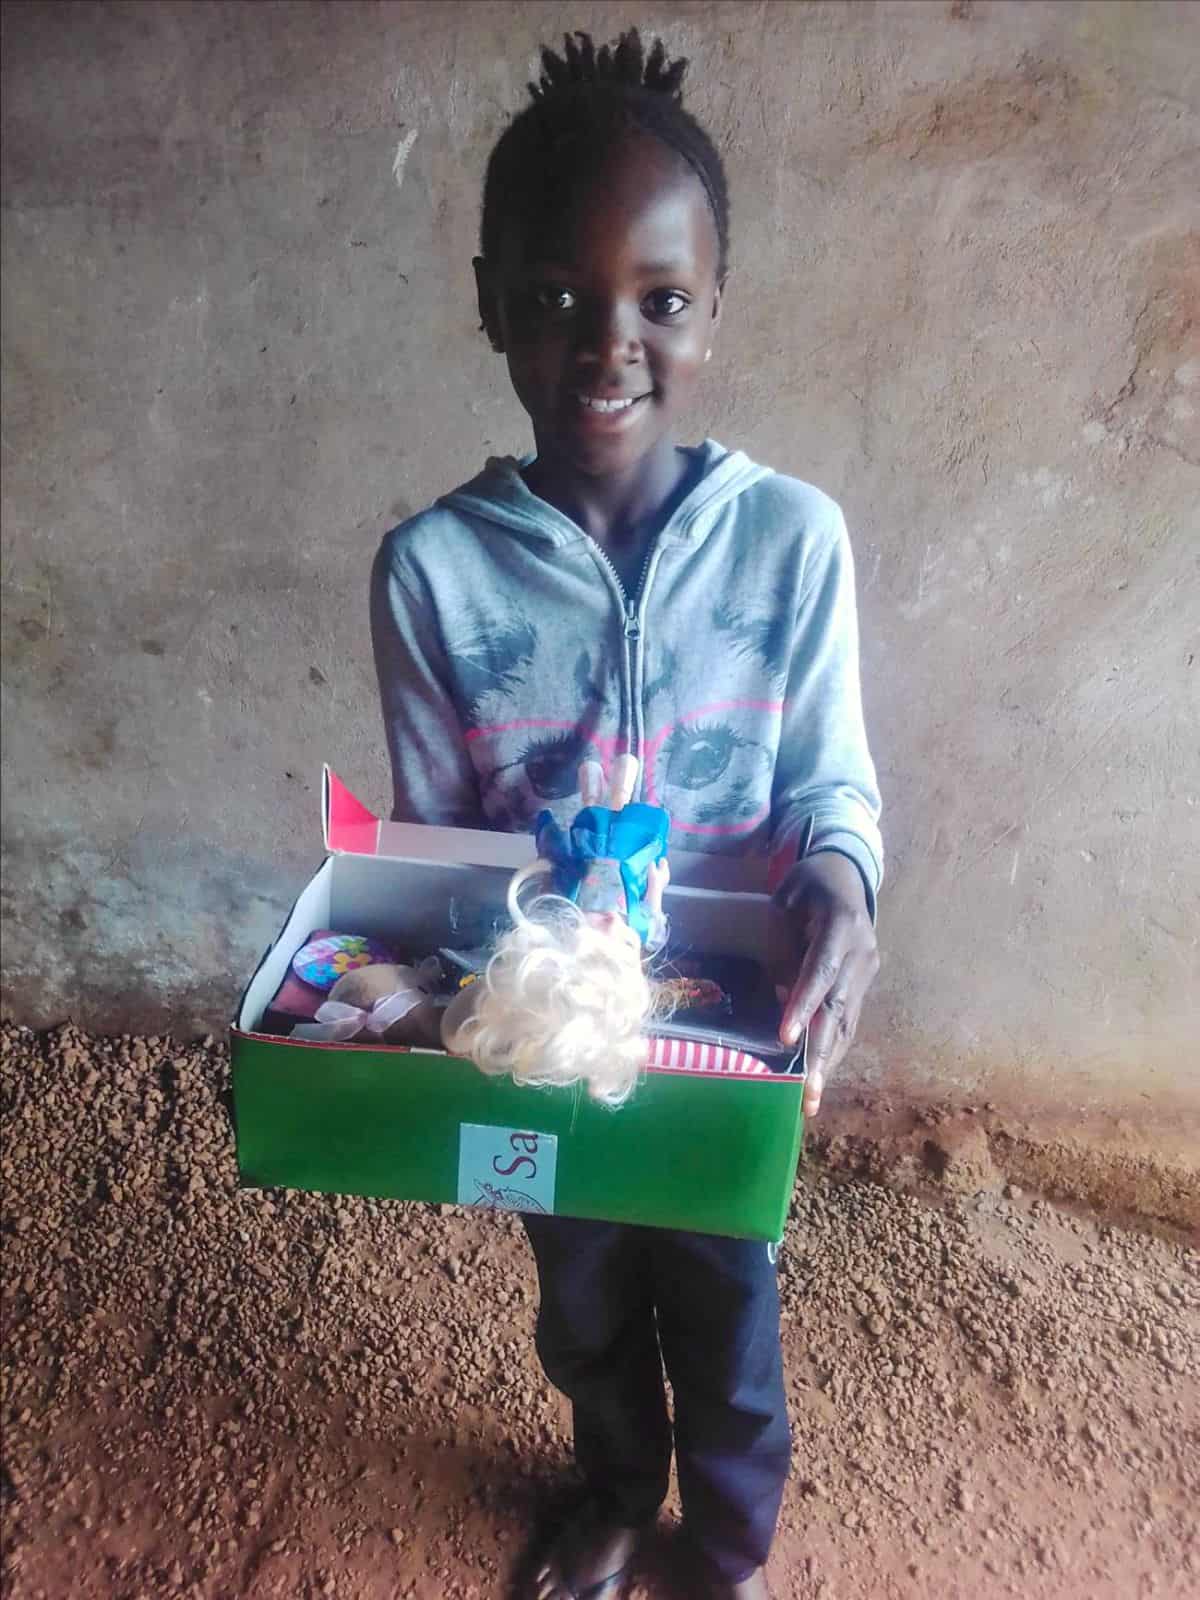 God cares deeply about every child who receives an Operation Christmas Child shoebox gift.